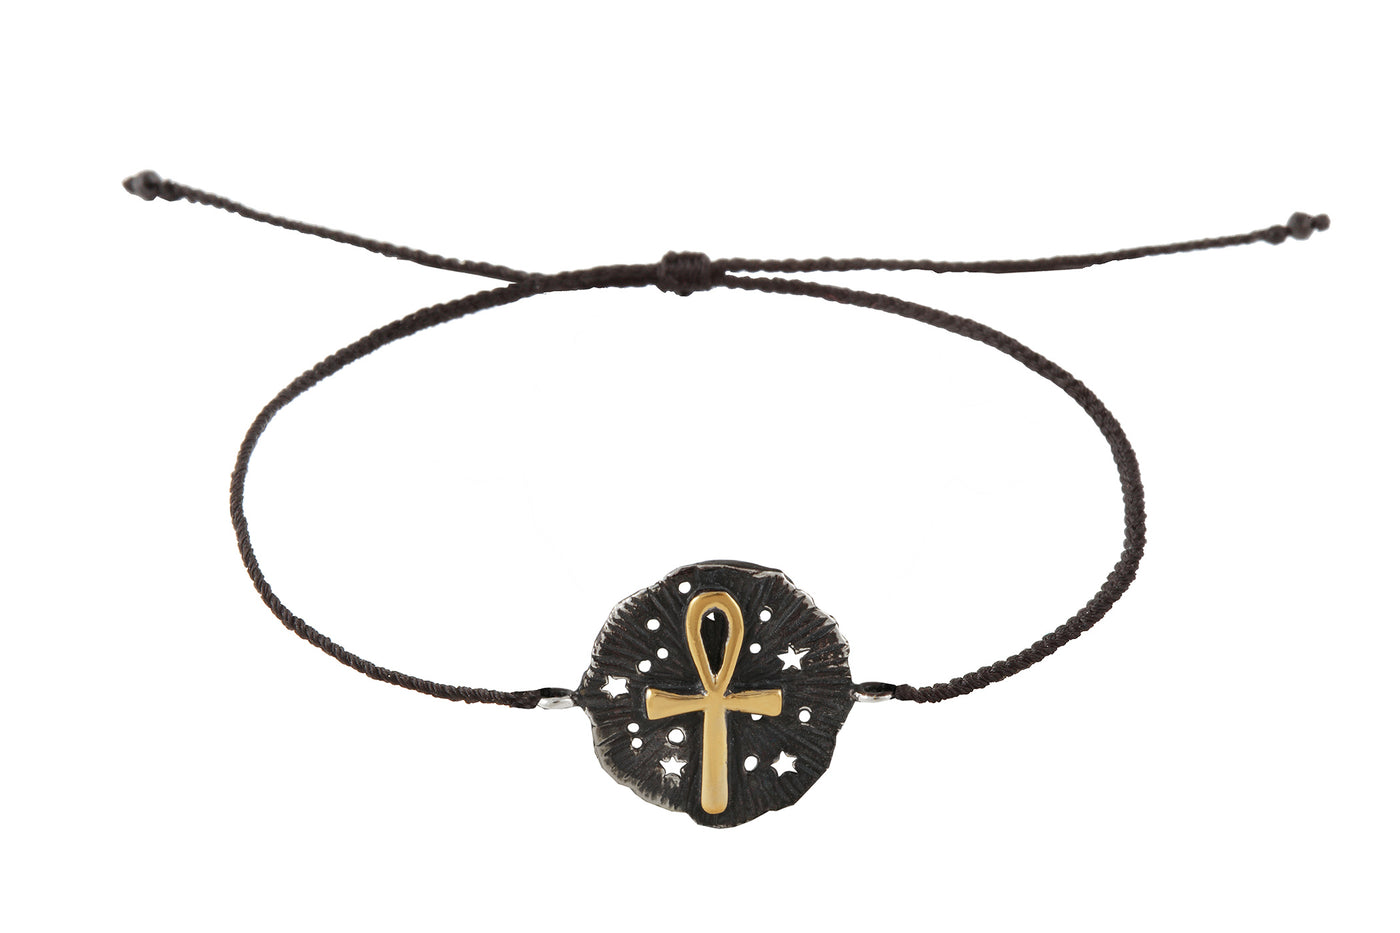 String bracelet with Ankh medallion amulet. Gold plated and oxide